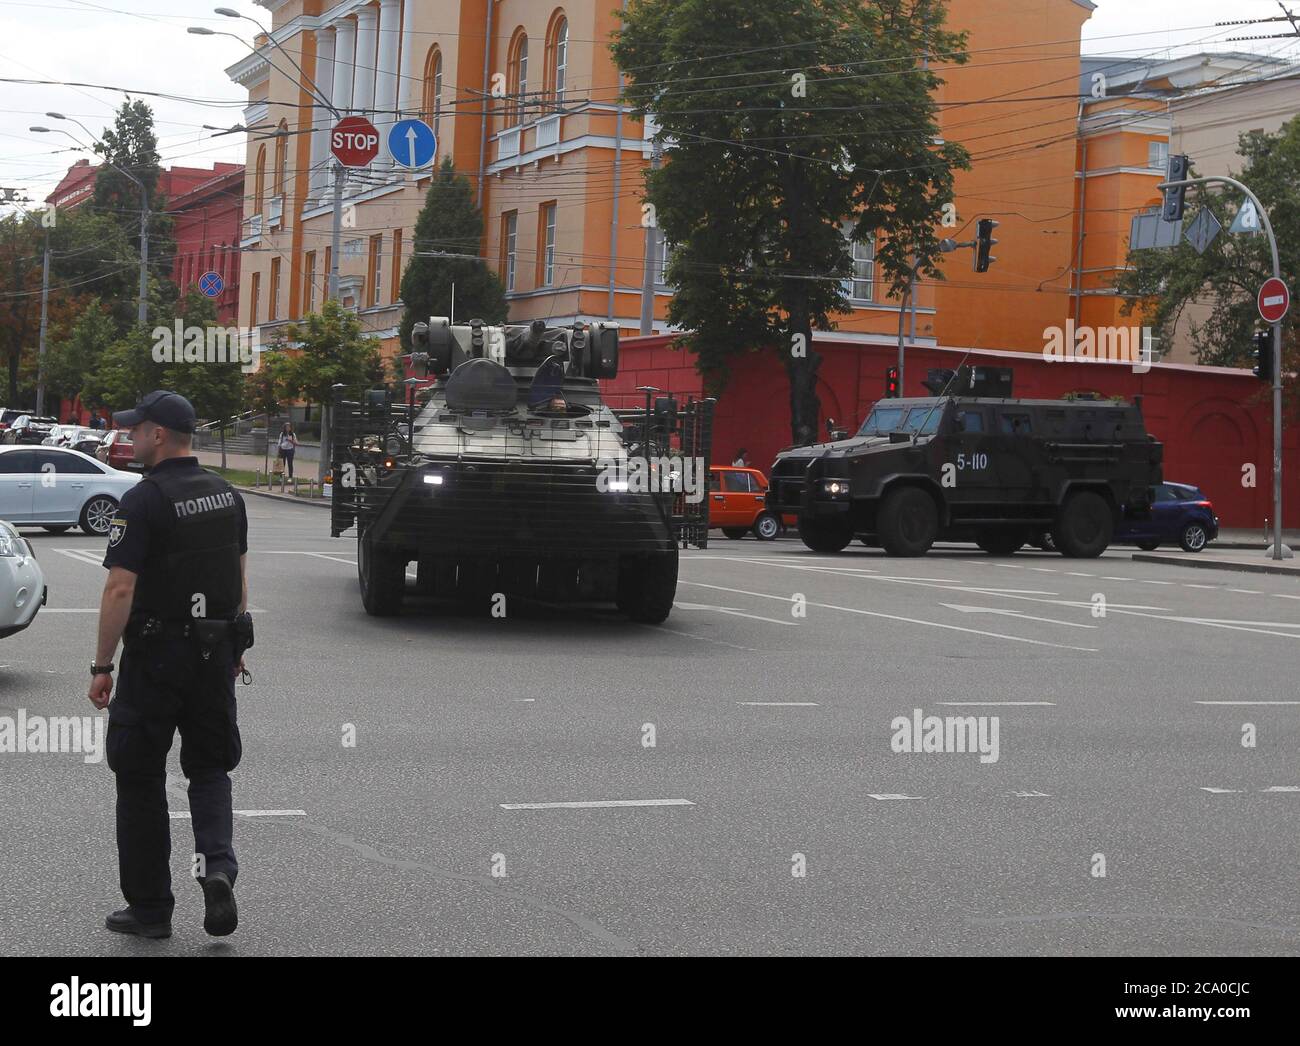 Kiev, Ukraine. 3rd Aug, 2020. Armored cars are seen not far of the building where an unidentified man threatens to blow up a bomb at the Universal bank office in Kiev, Ukraine, on 3 August 2020. The SBU Security Service of Ukraine's specops unit detained Uzbekistan citizen who threatened to blow up a bank office in the capital city of Kiev, according to media. Credit: Serg Glovny/ZUMA Wire/Alamy Live News Stock Photo